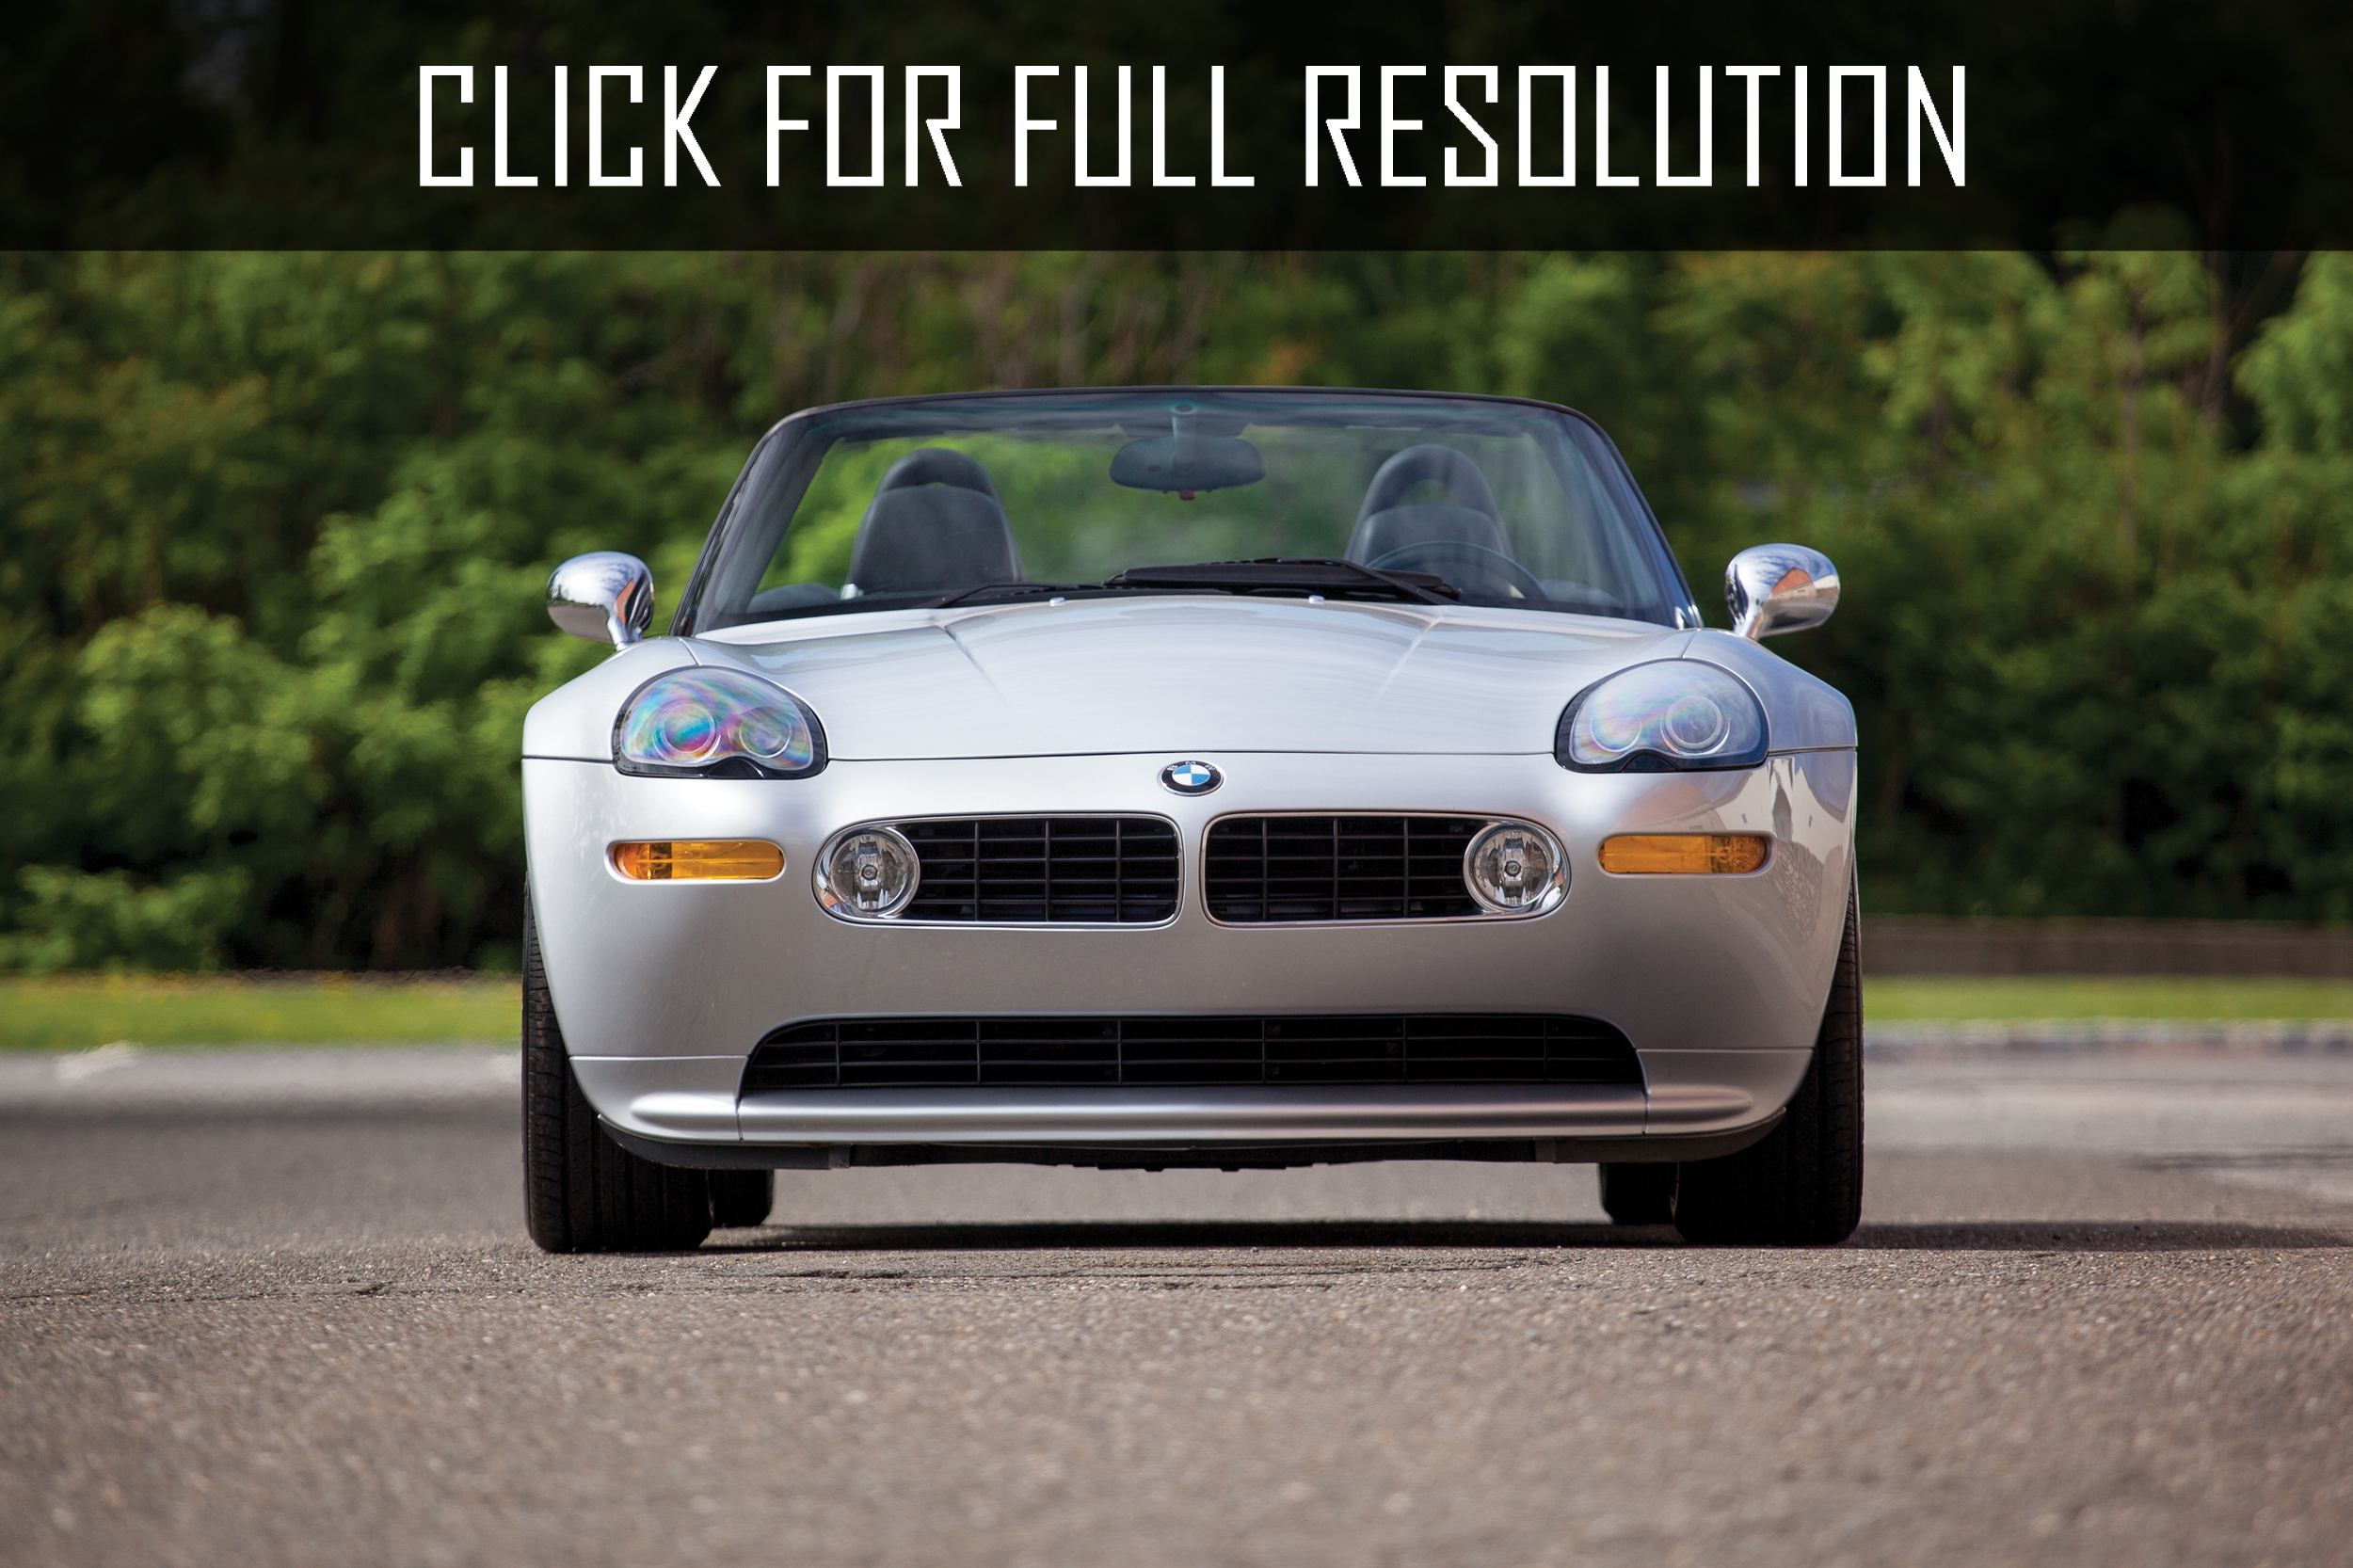 Faial pion Muildier 2017 Bmw Z8 - news, reviews, msrp, ratings with amazing images